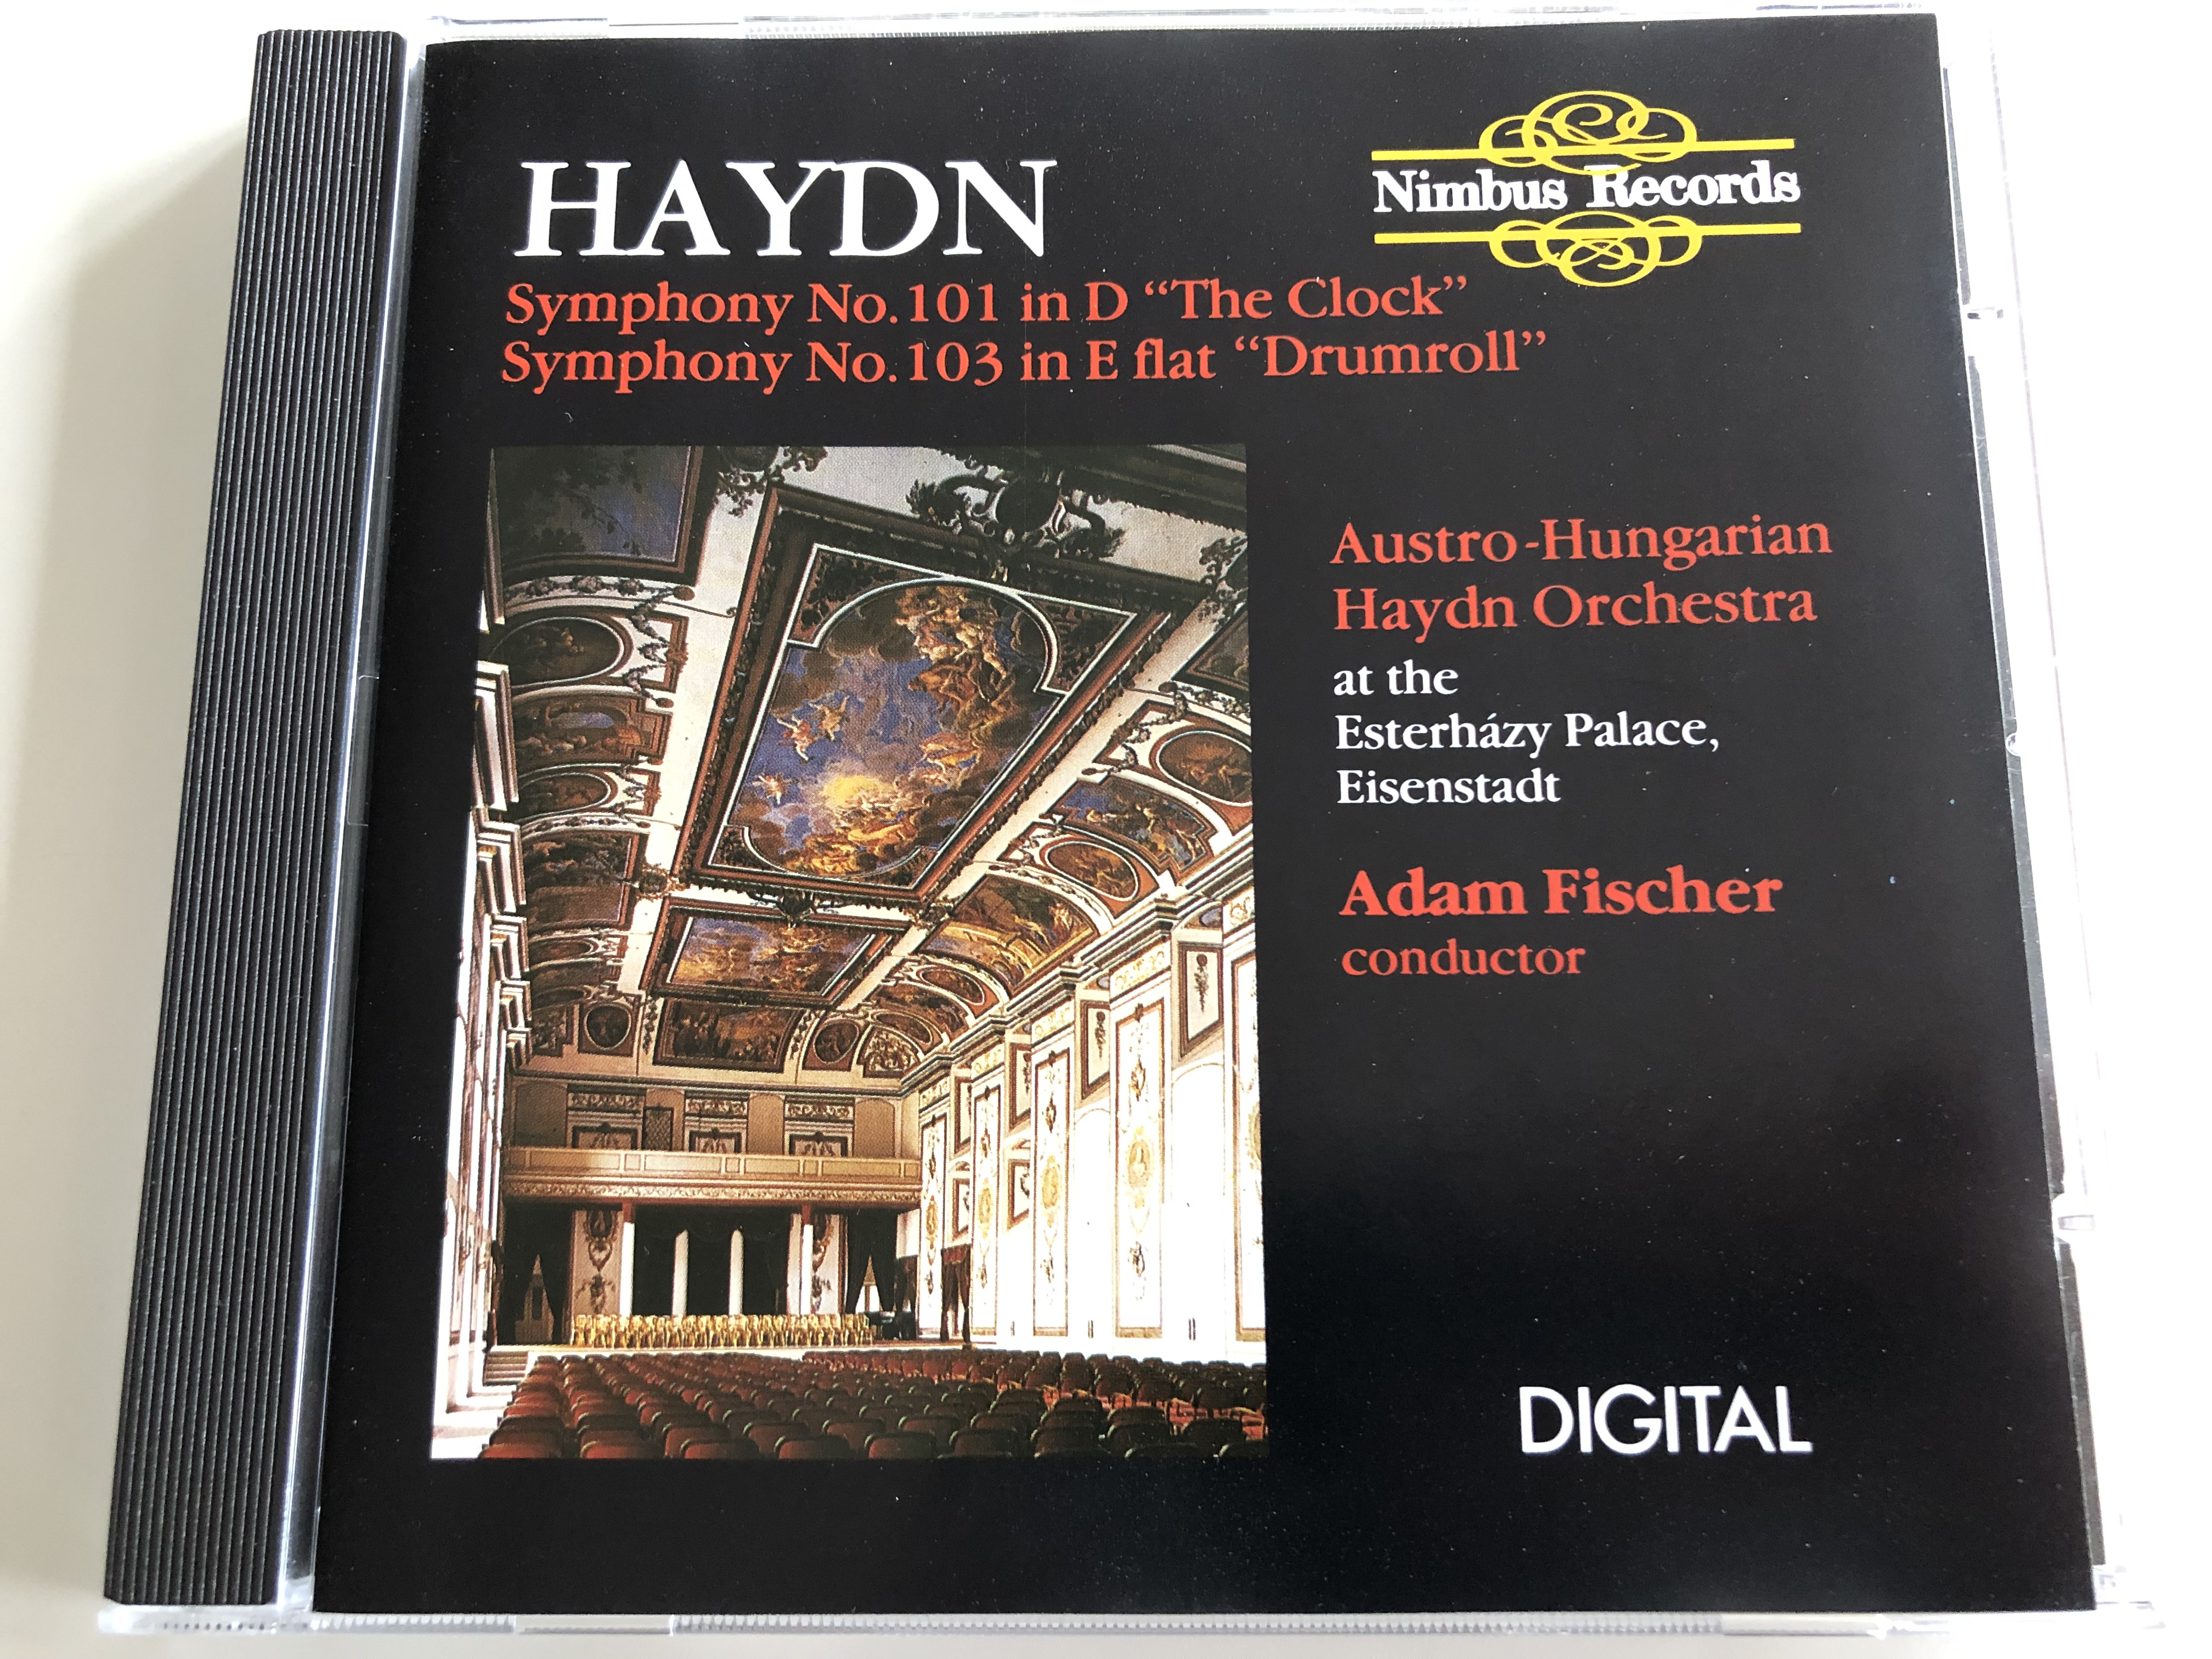 haydn-symphony-no.-101-in-d-the-clock-symphony-no.-103-in-e-flat-drumroll-austro-hungarian-haydn-orchestra-at-the-esterhazy-palace-eisenstadt-conductor-adam-fischer-nimbus-records-a-1-.jpg